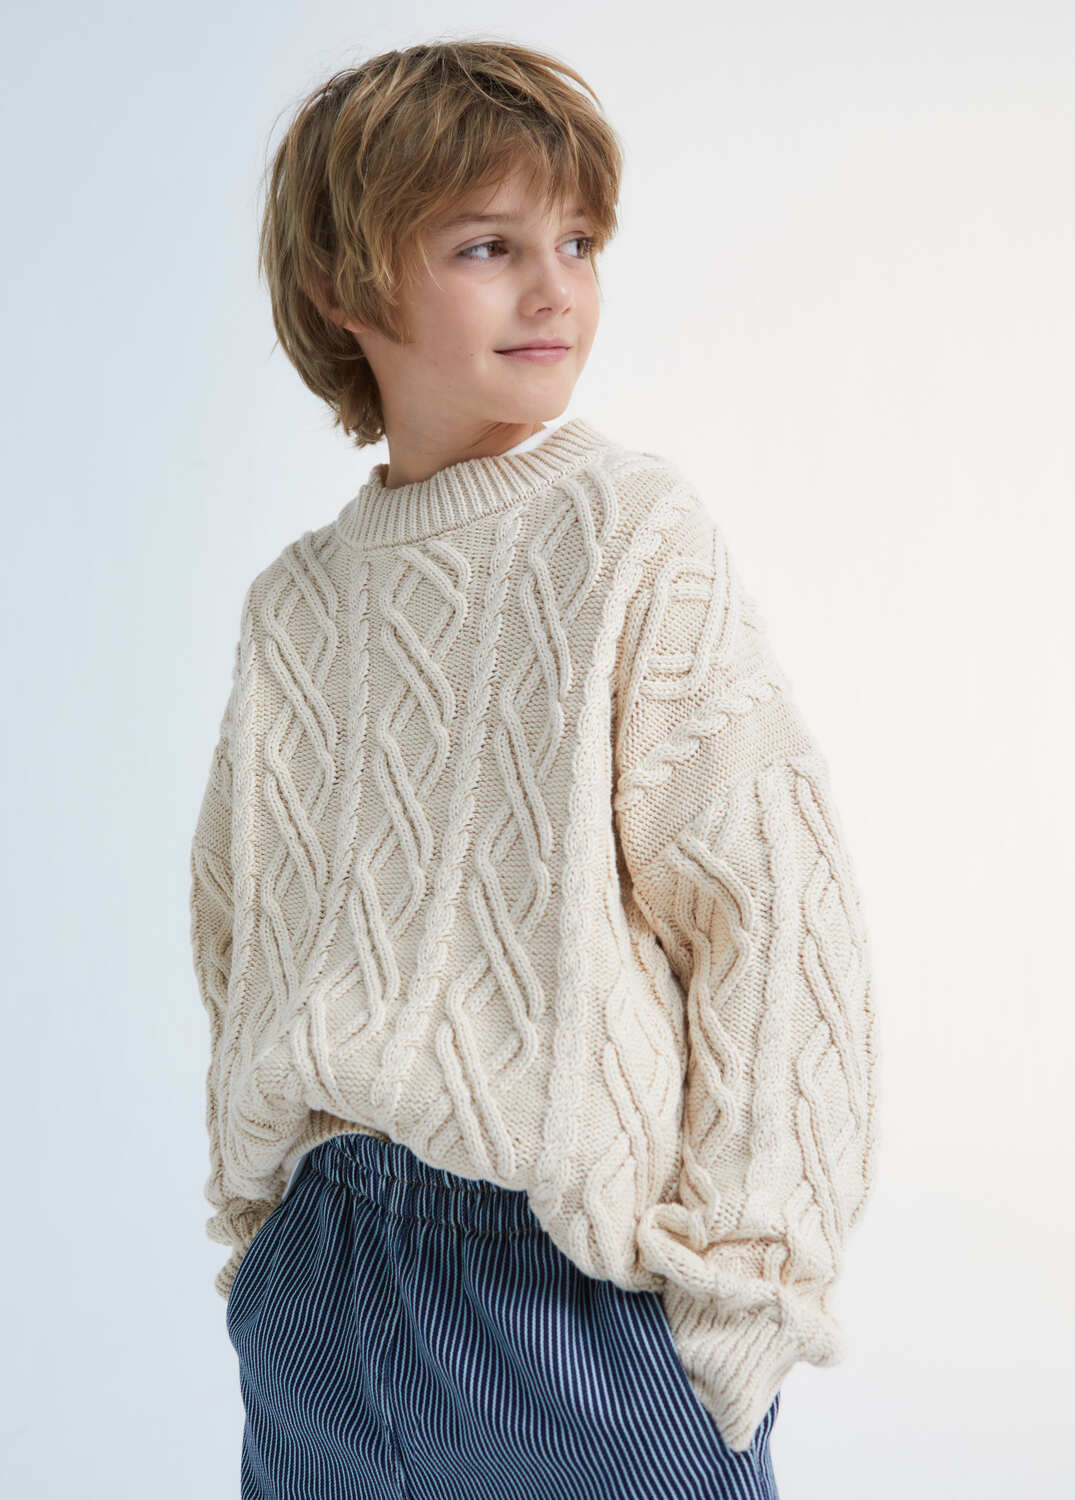 Russel Cable Knit Jumper